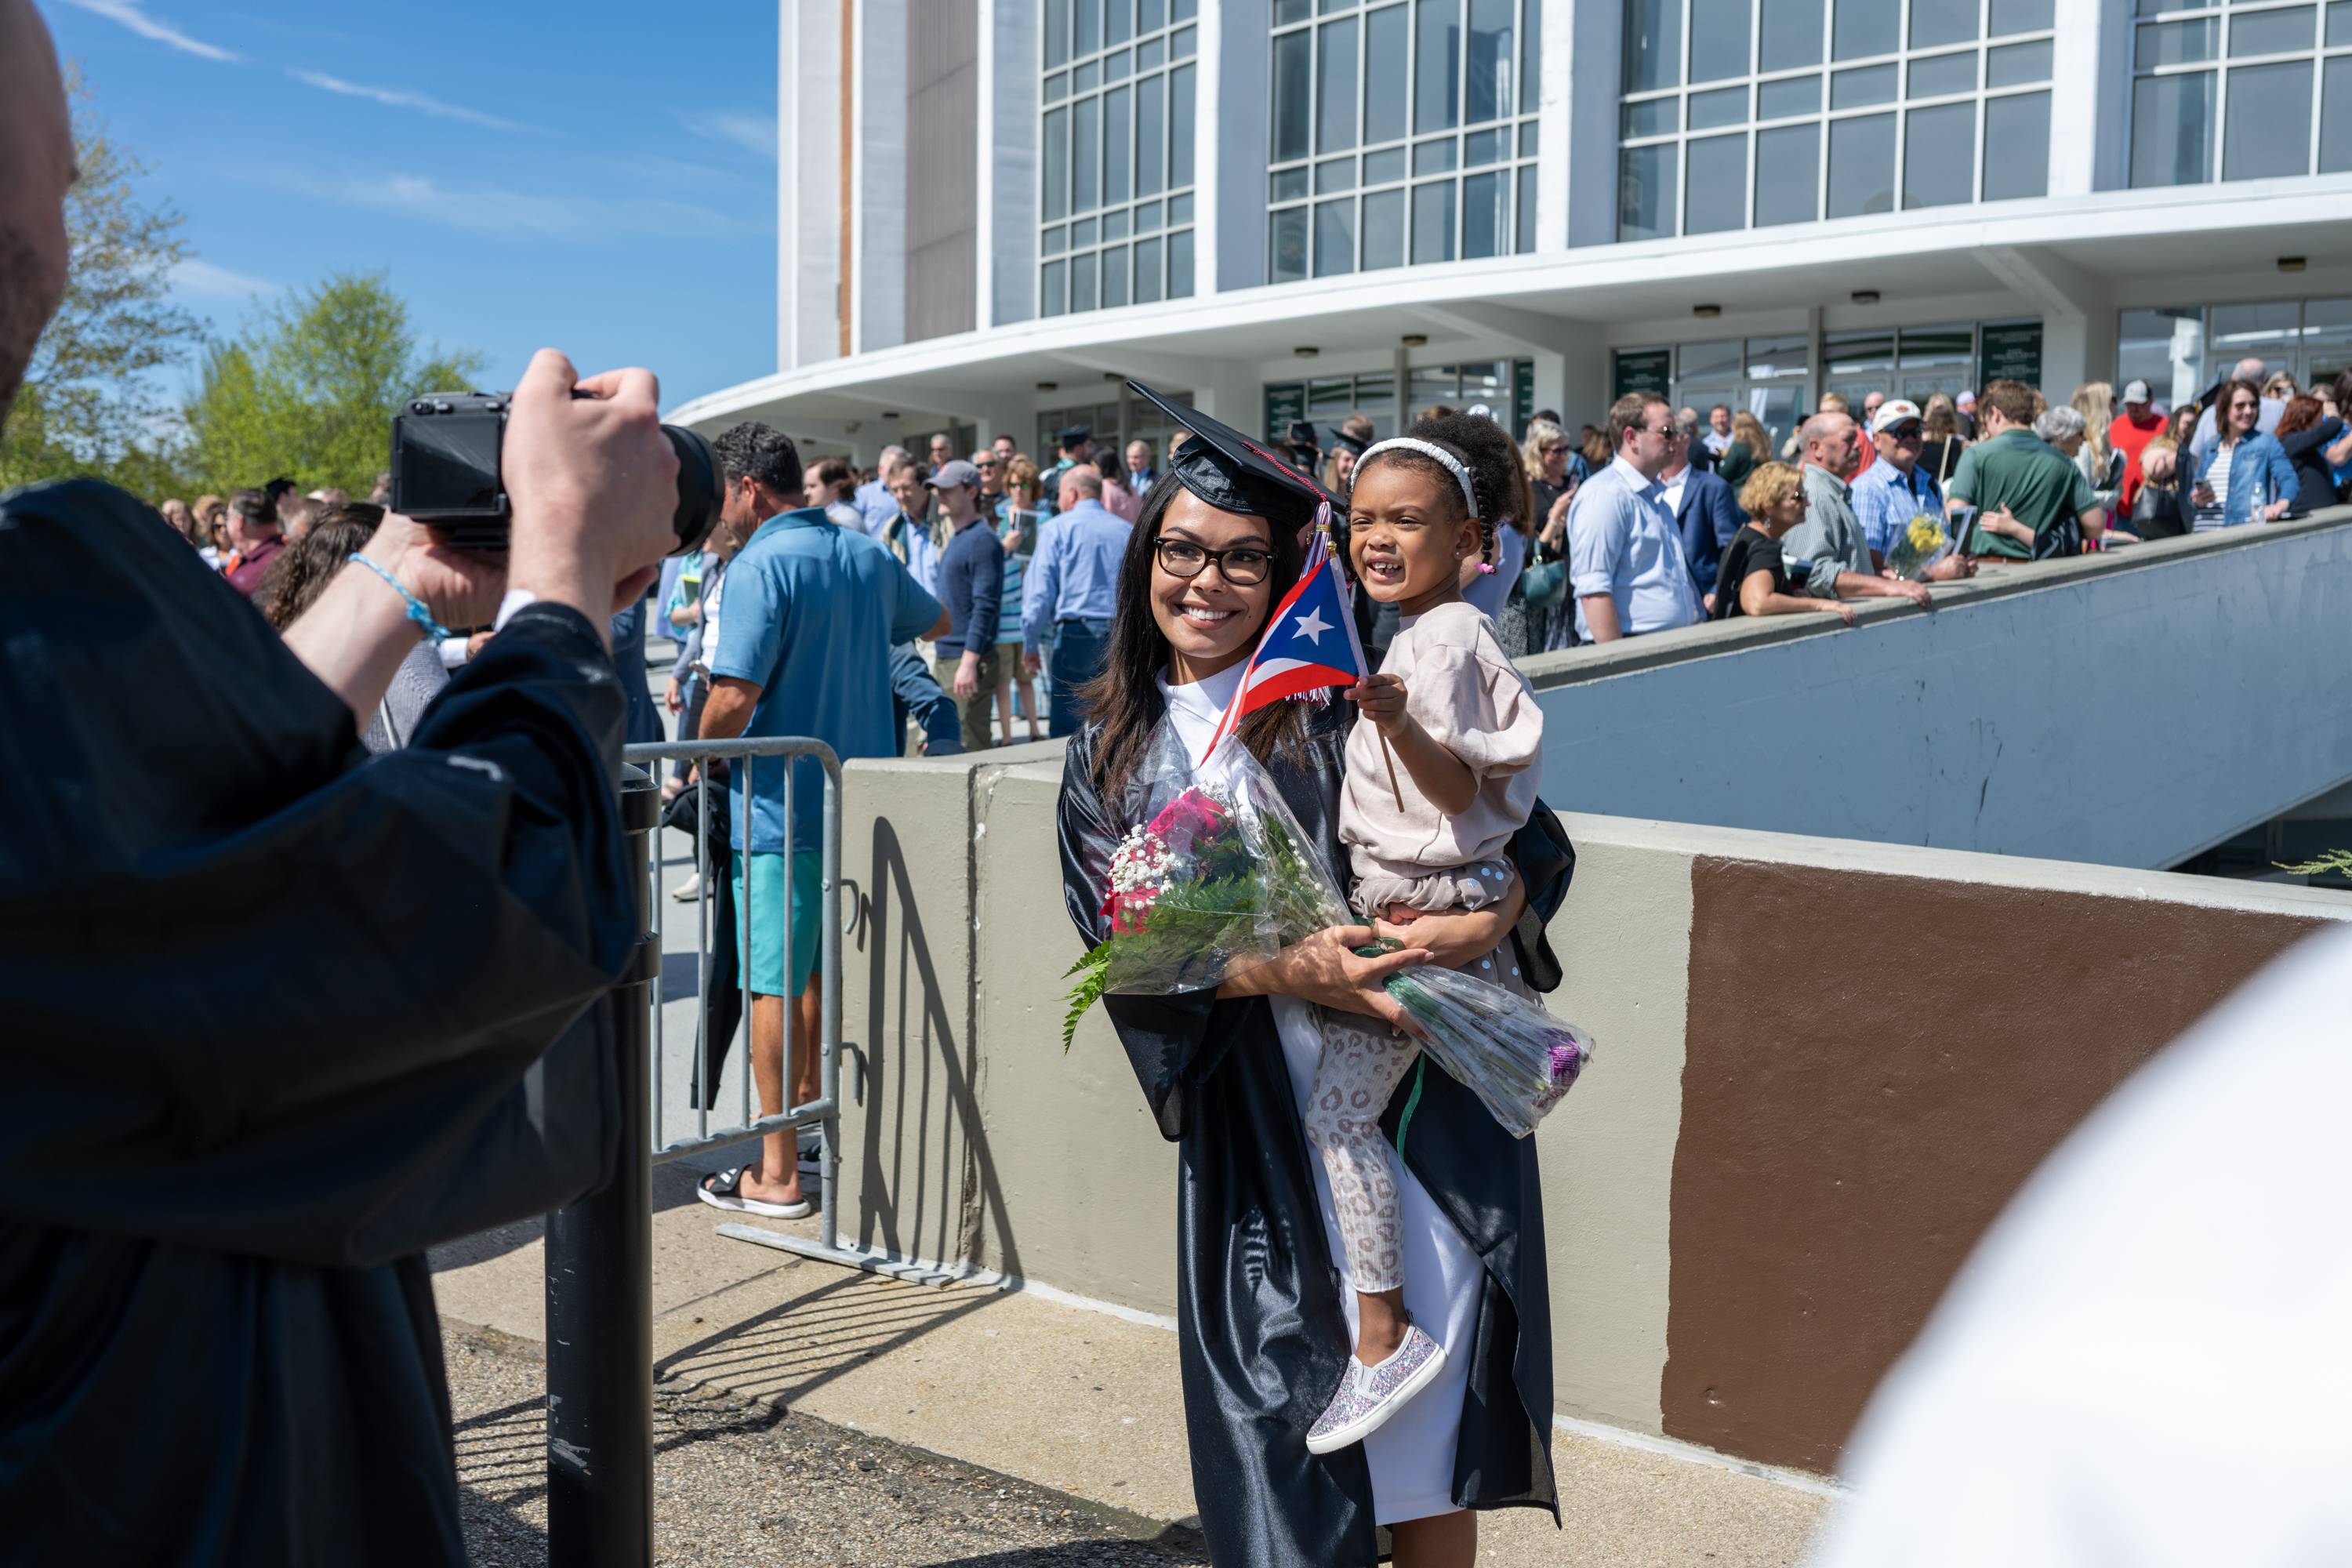 OHIO graduates celebrated their big day while also inspiring younger generations to reach for their dreams, too.